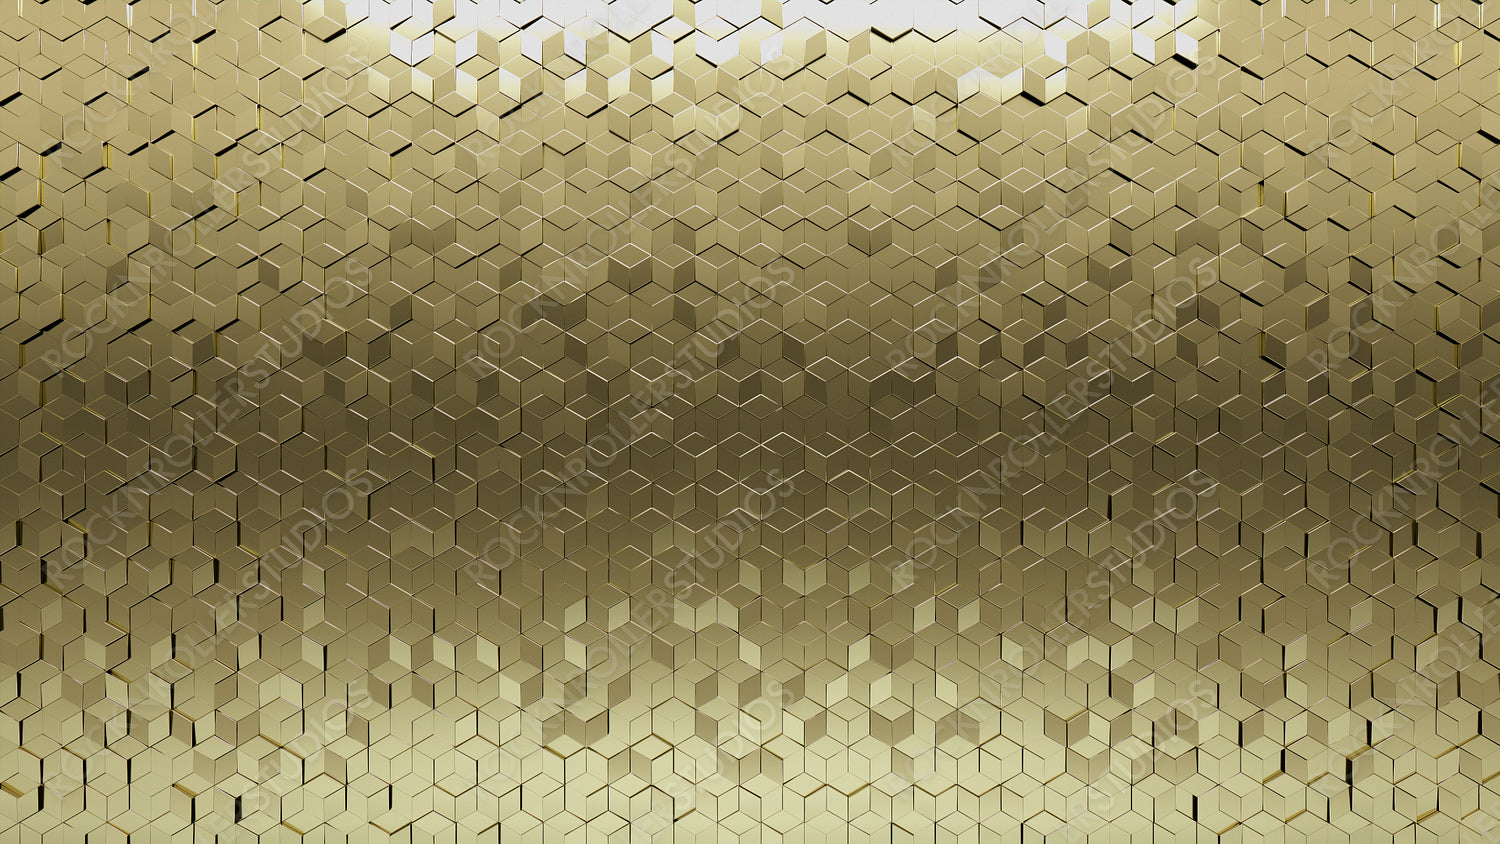 Luxurious, Polished Wall background with tiles. Diamond Shaped, tile Wallpaper with 3D, Gold blocks. 3D Render